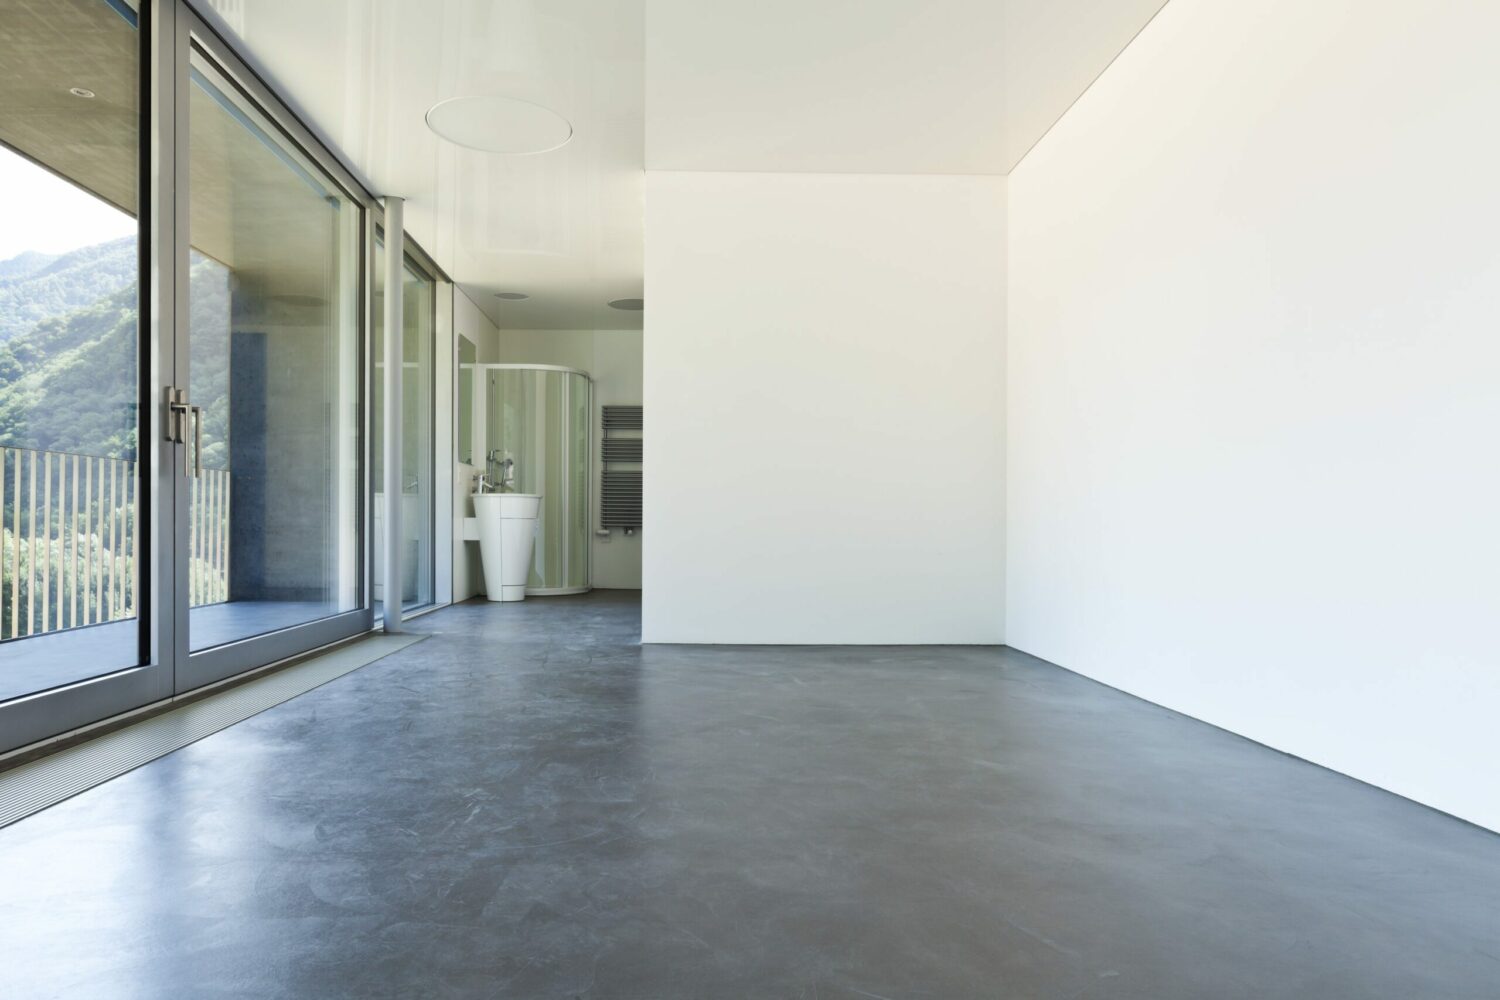 Concrete flooring in a house